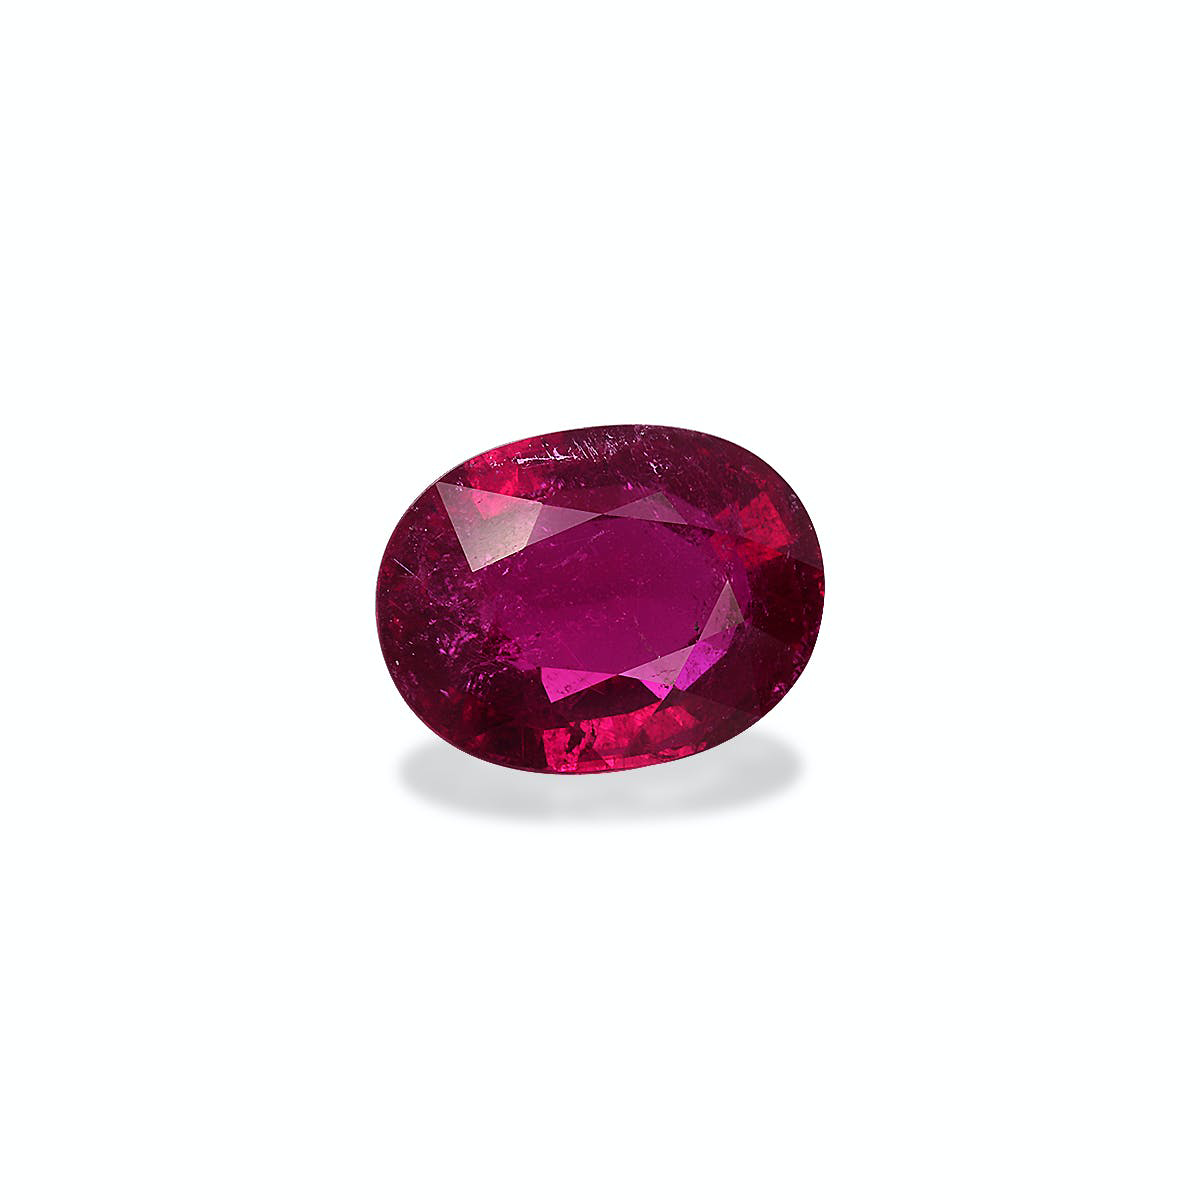 Picture of Red Rubellite Tourmaline 6.62ct (RL0720)